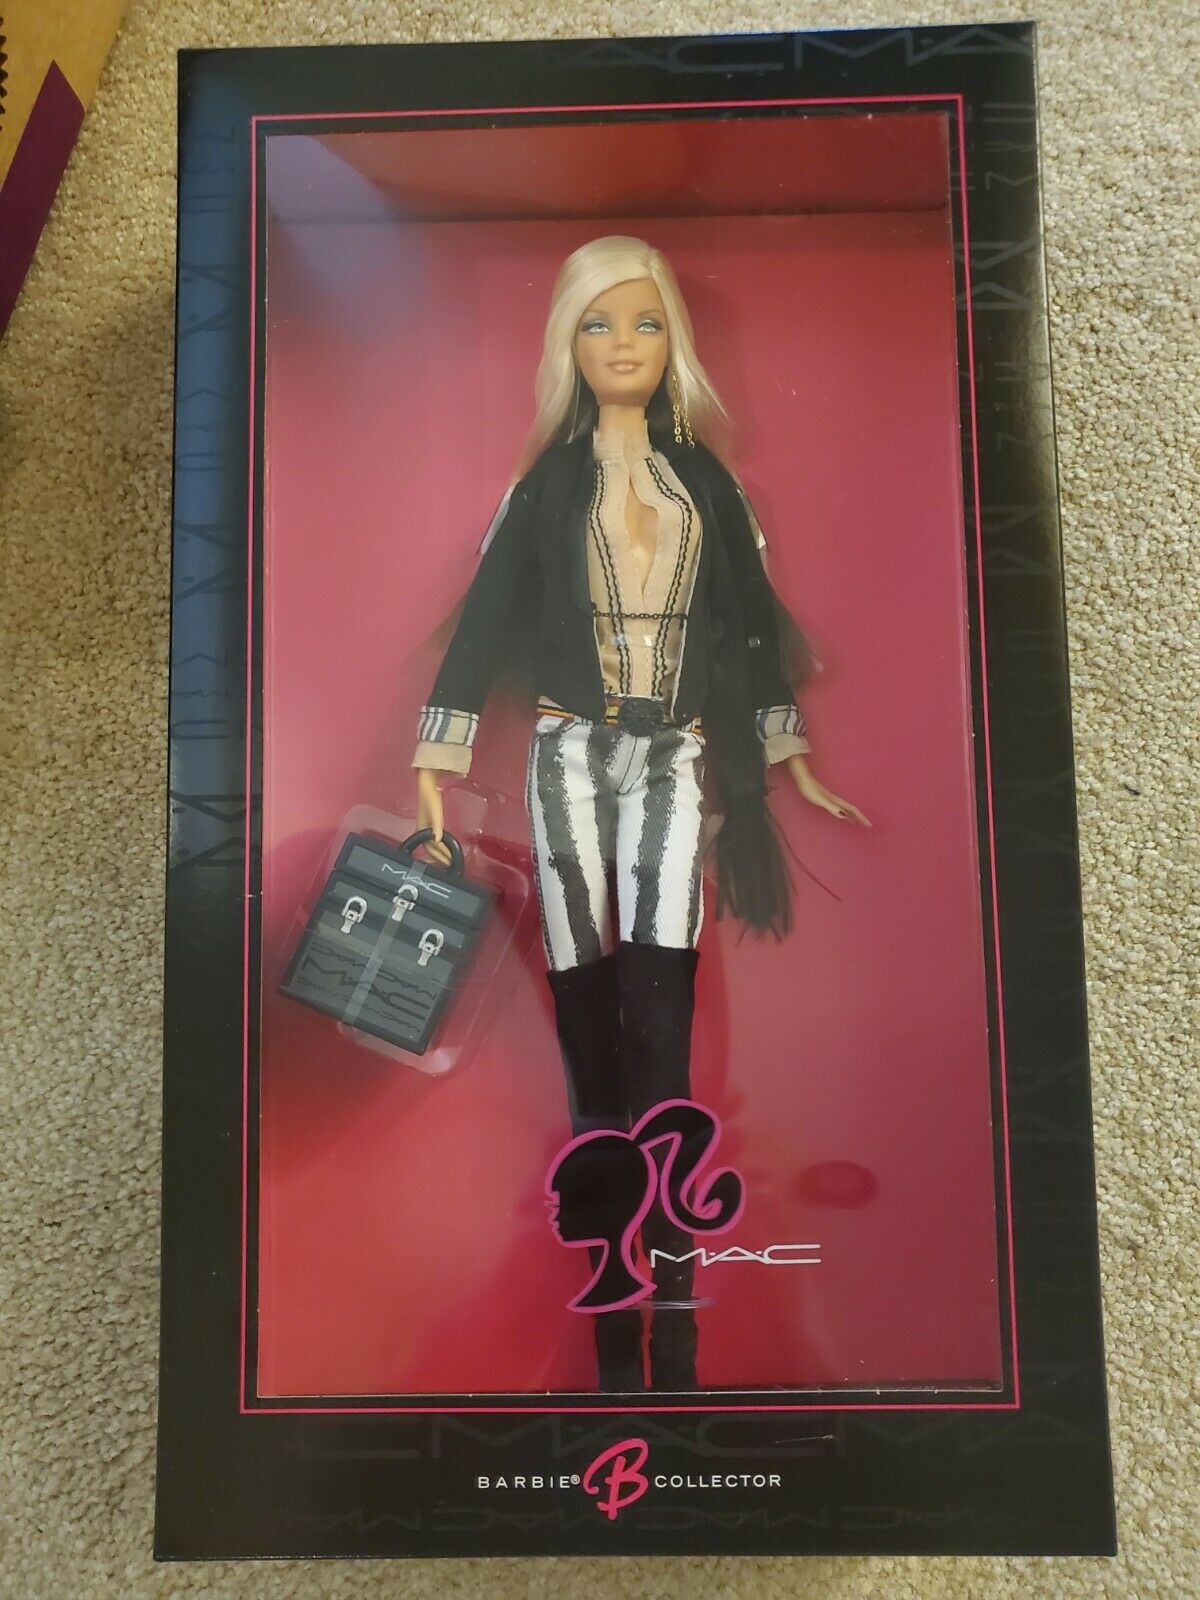 2006 Mac Barbie Doll..gold Label..never Removed From Shipping Box From Factory!